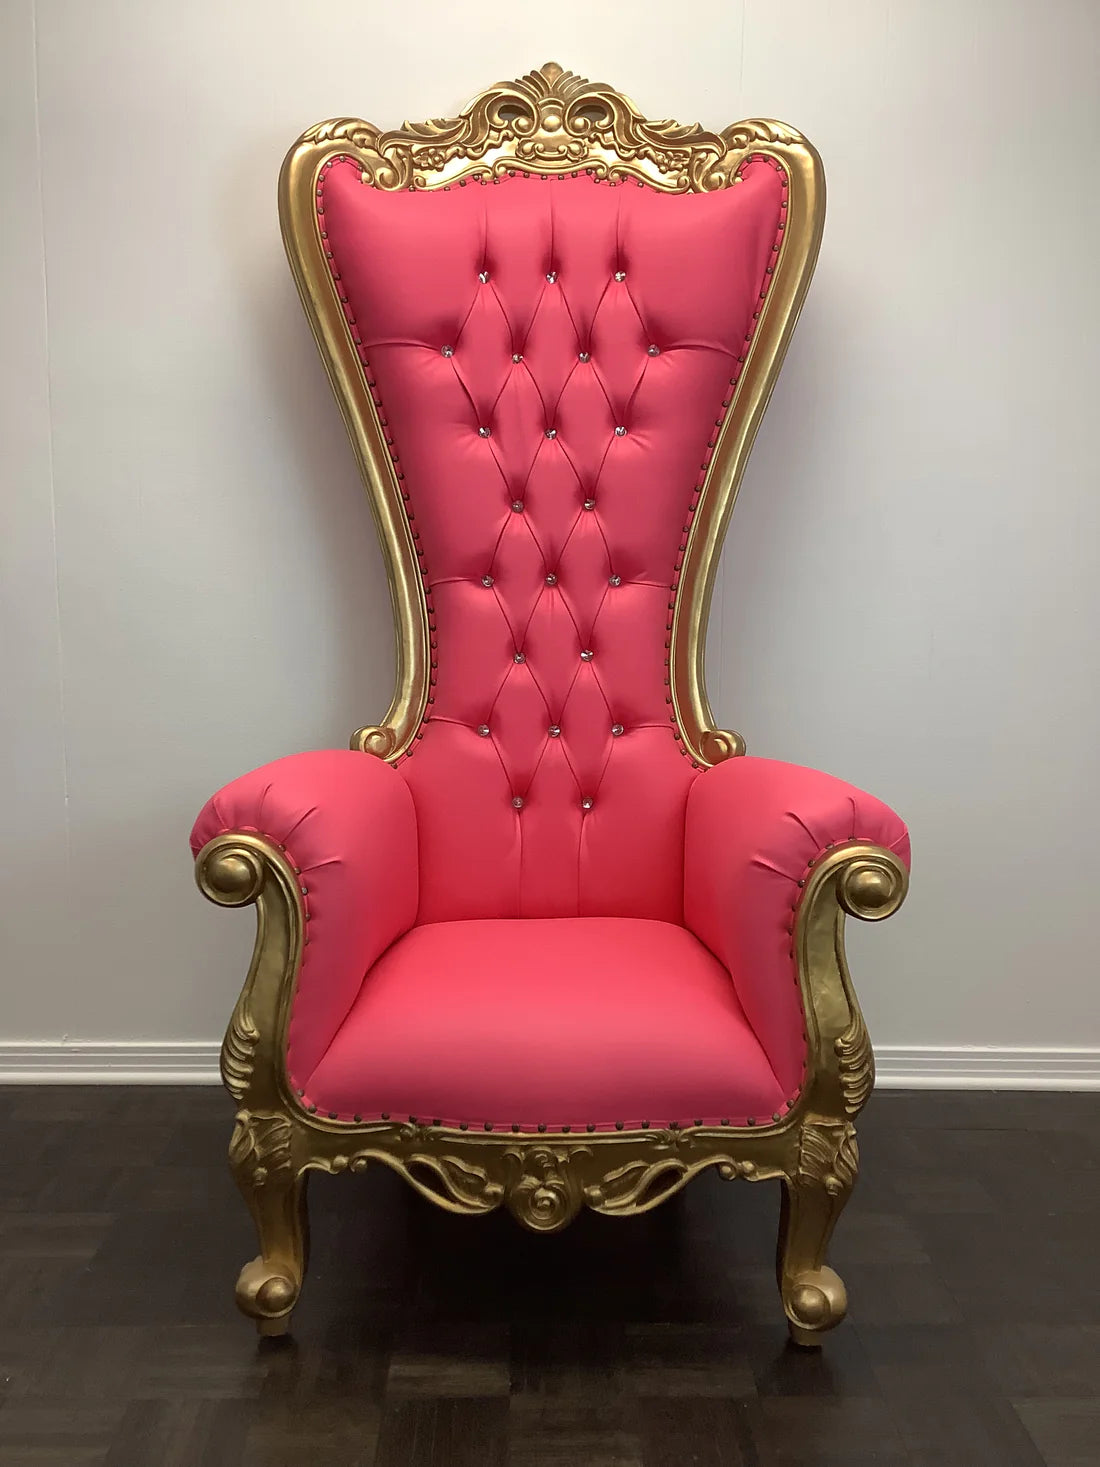 Pink and Gold Throne Chairs Hire